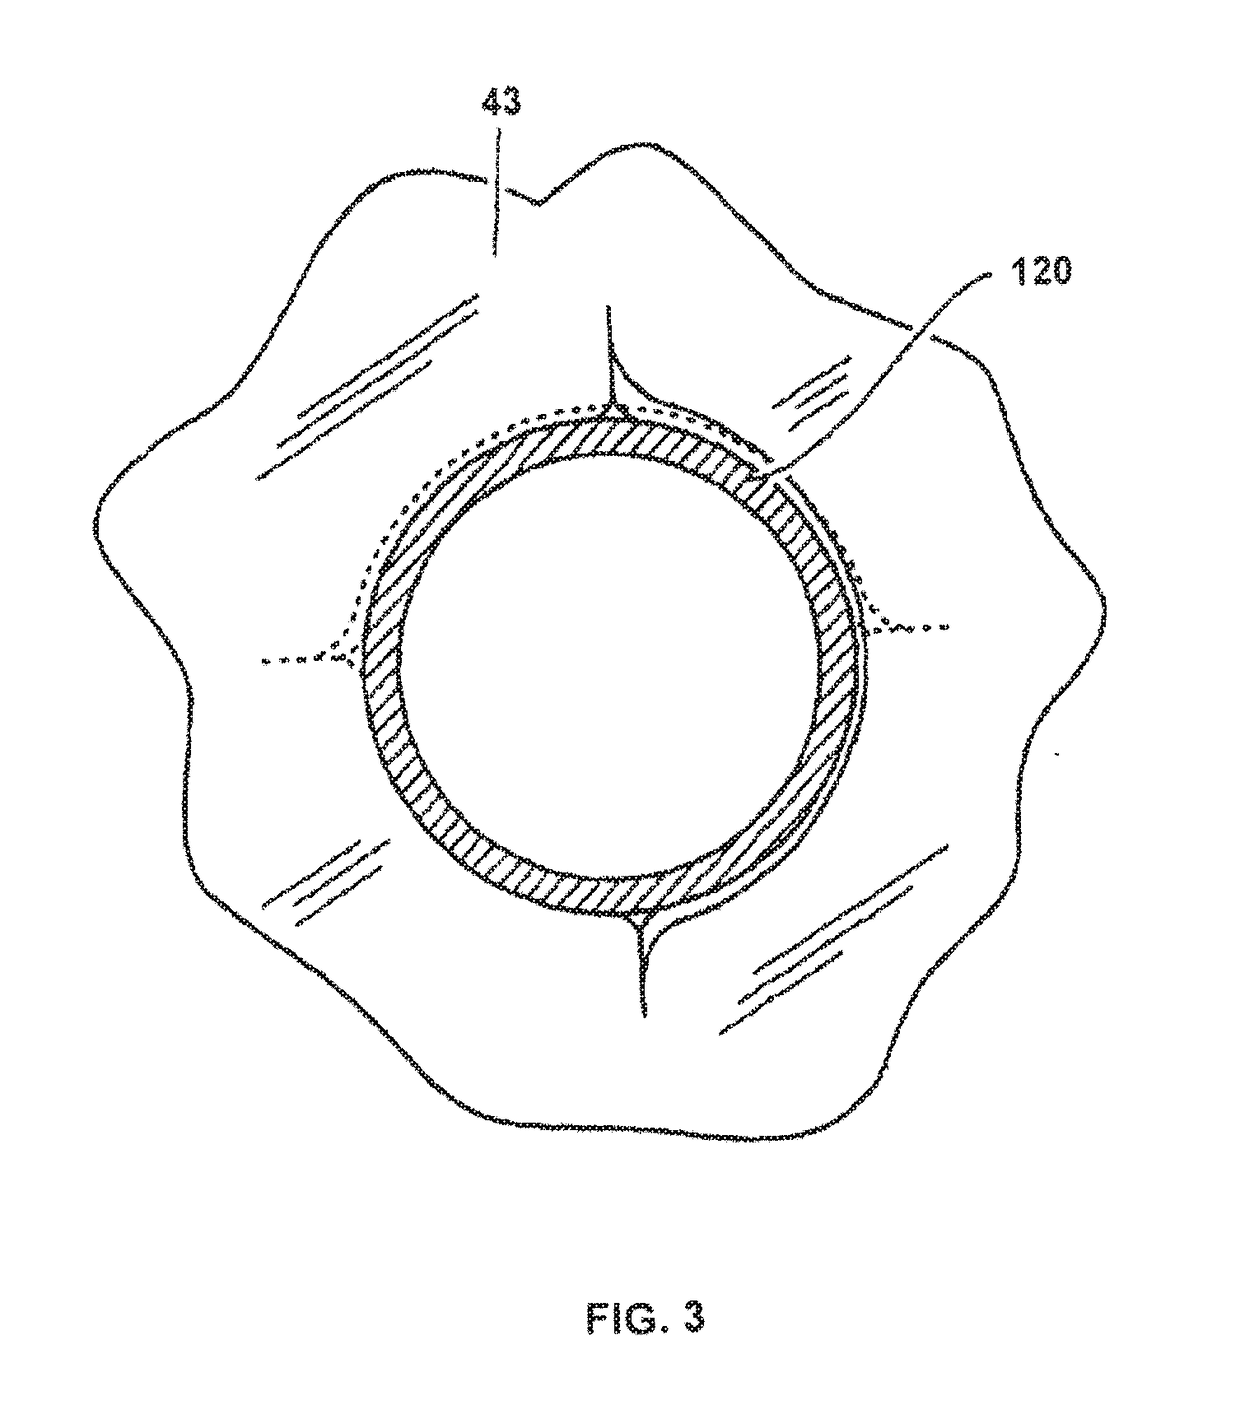 Biocompatible Self-Lubricating Polymer Compositions and Their Use in Medical and Surgical Devices